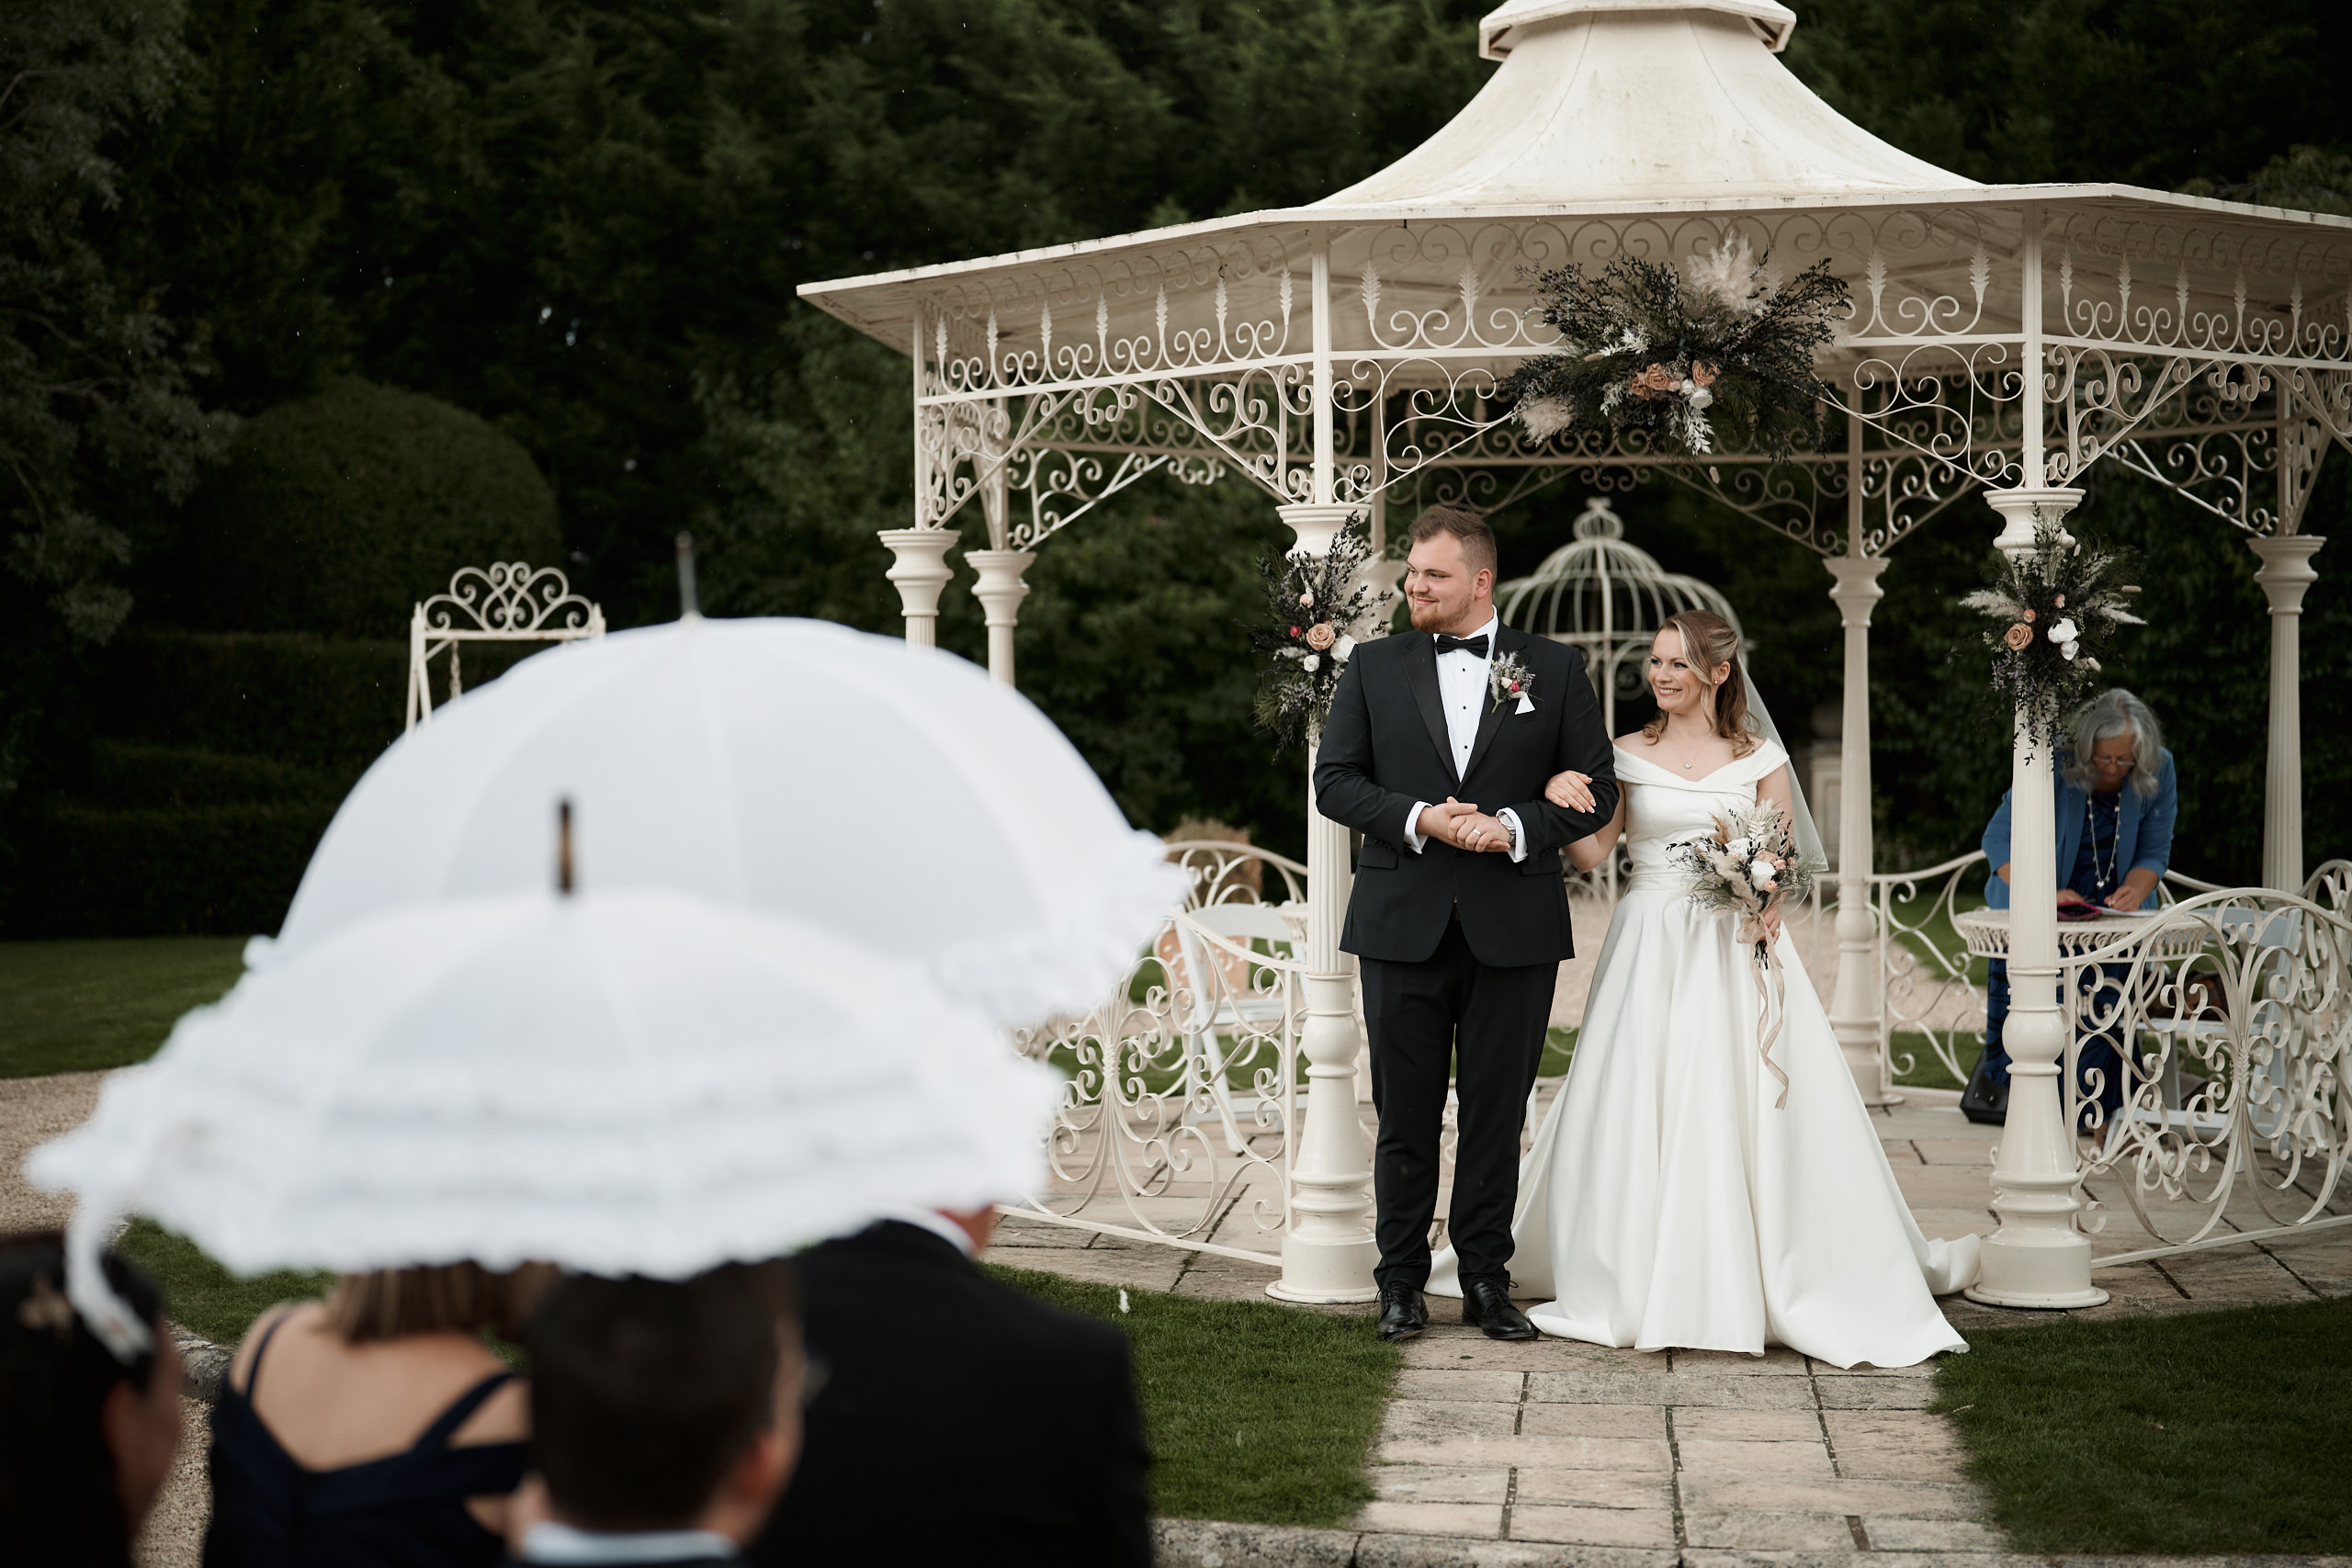 A couple getting married is standing under a pavilion with umbrellas.